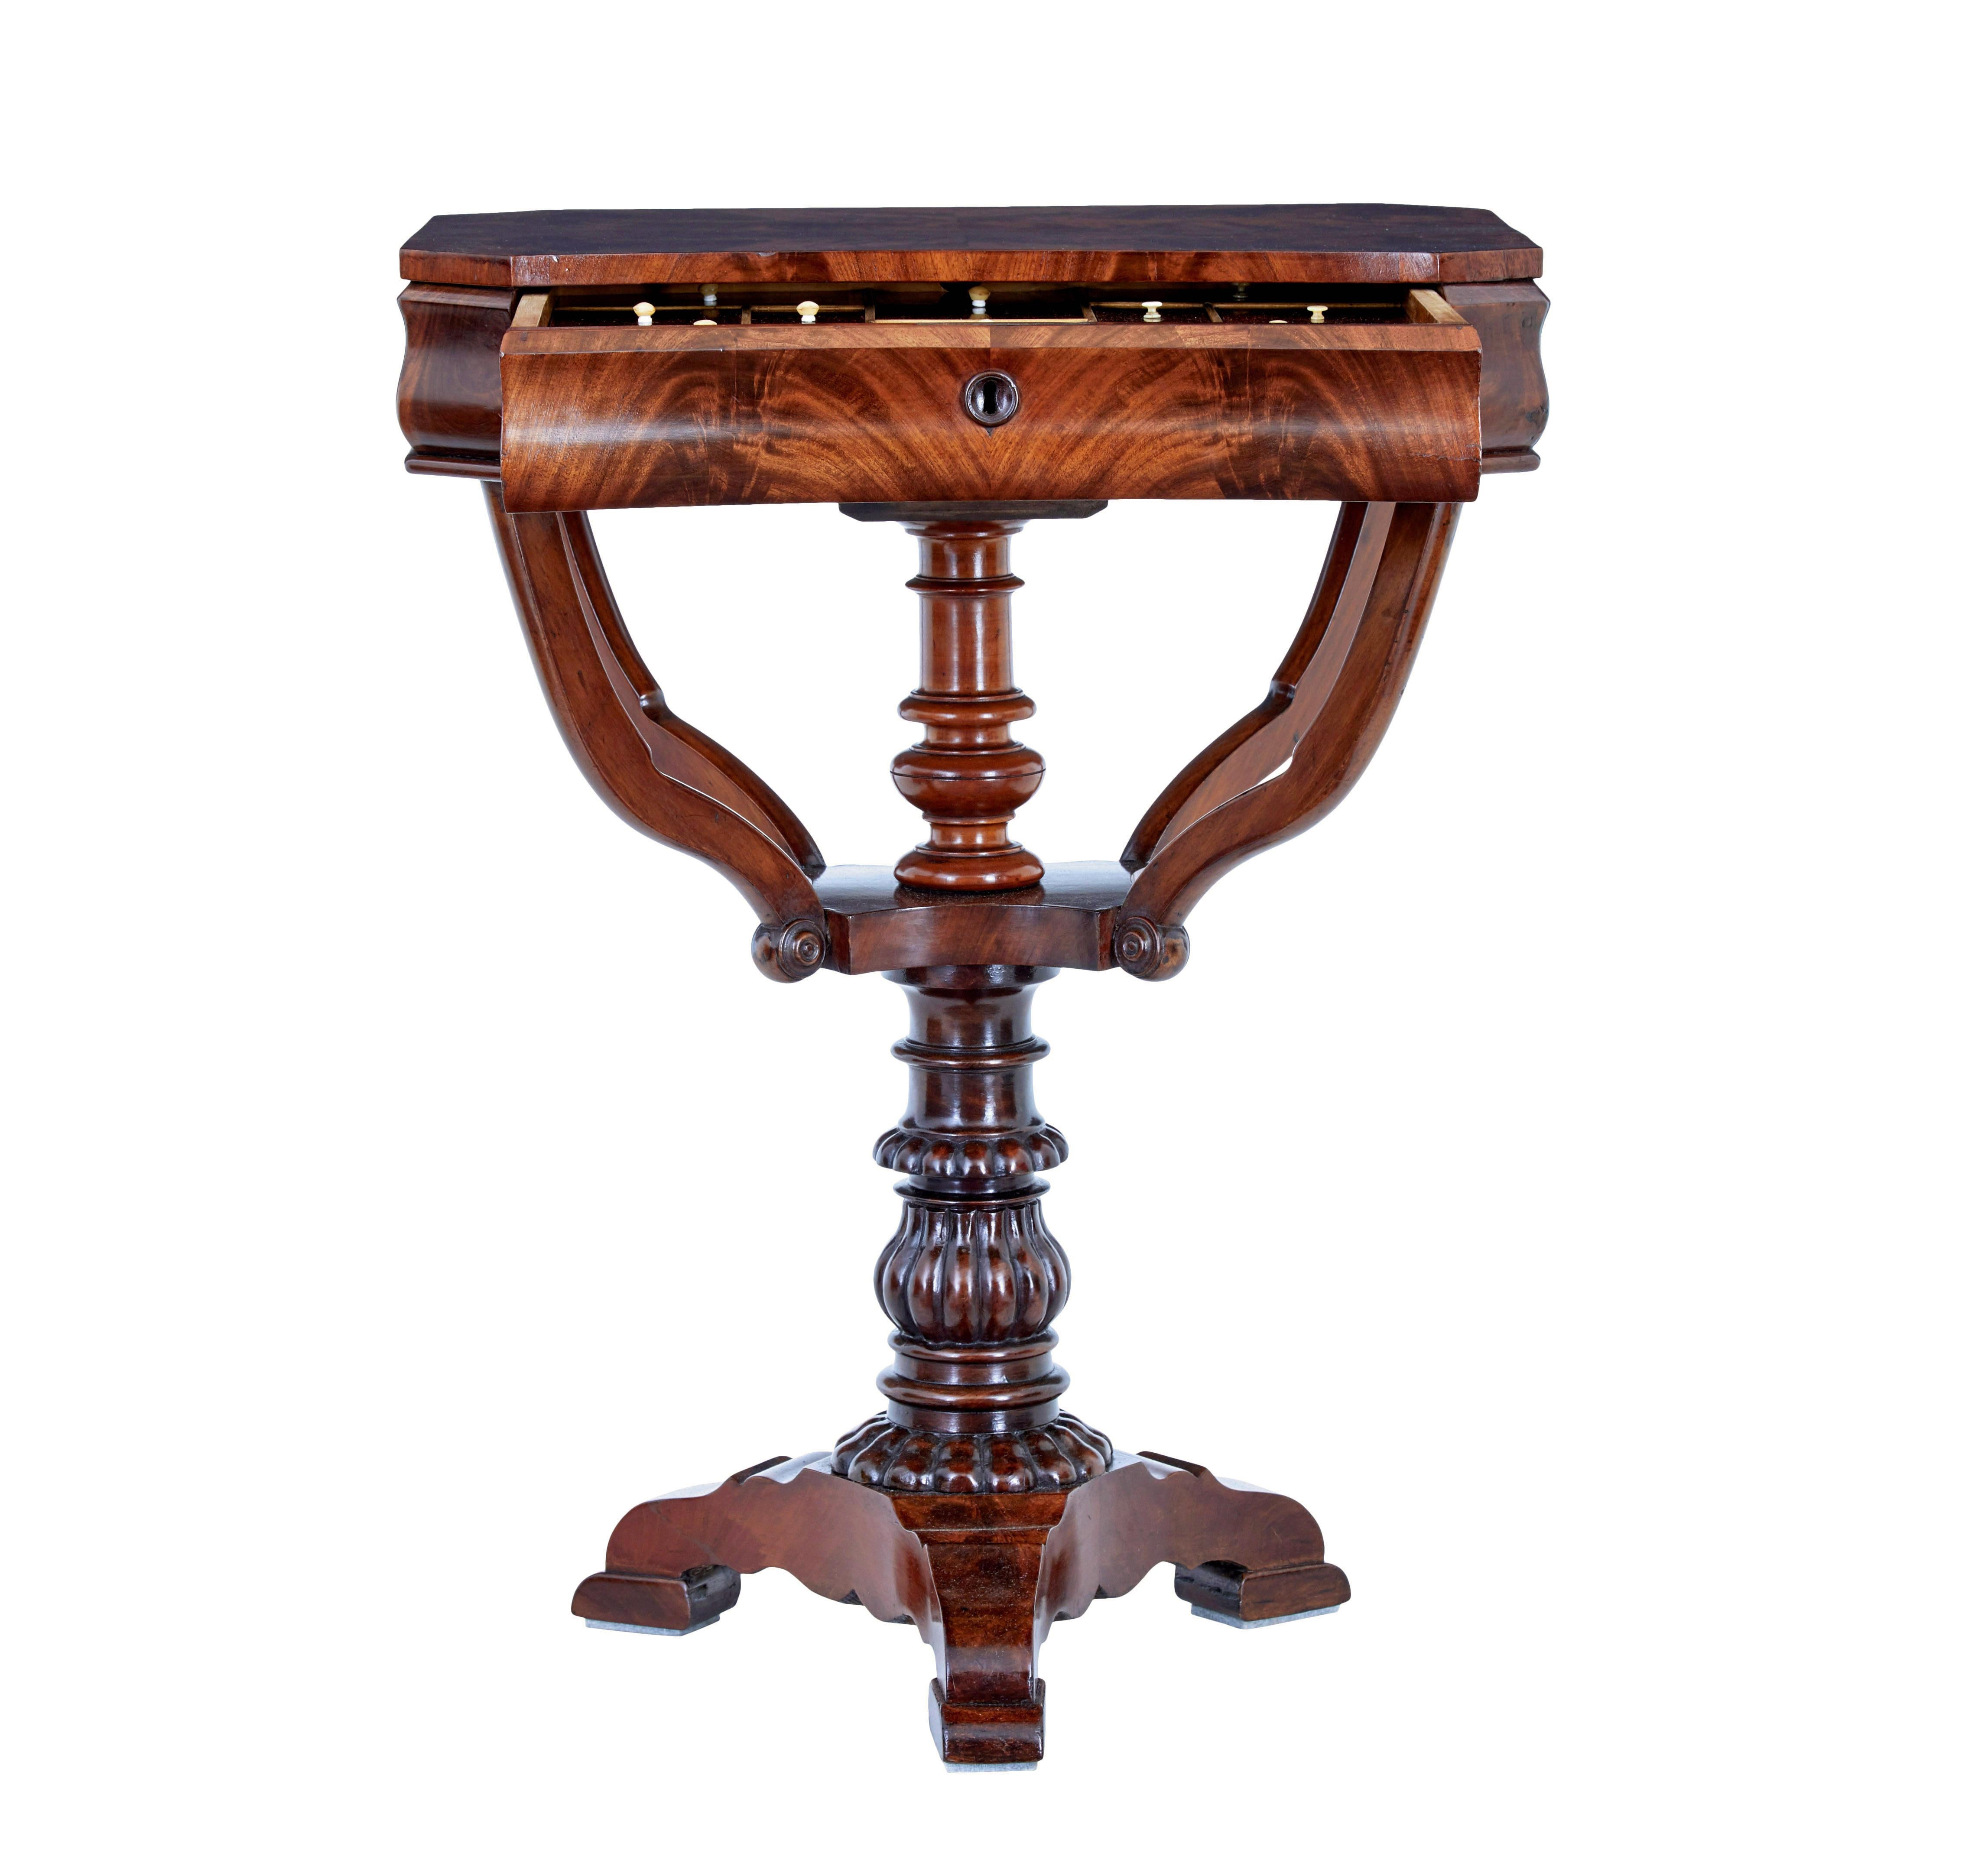 Danish 19th century flame mahogany side/sewing table circa 1870.

Good quality piece of danish furniture very much in the earlier William IV taste.

Rectangular top with canted corners and a concave front.  Quarter matched veneers to the top which